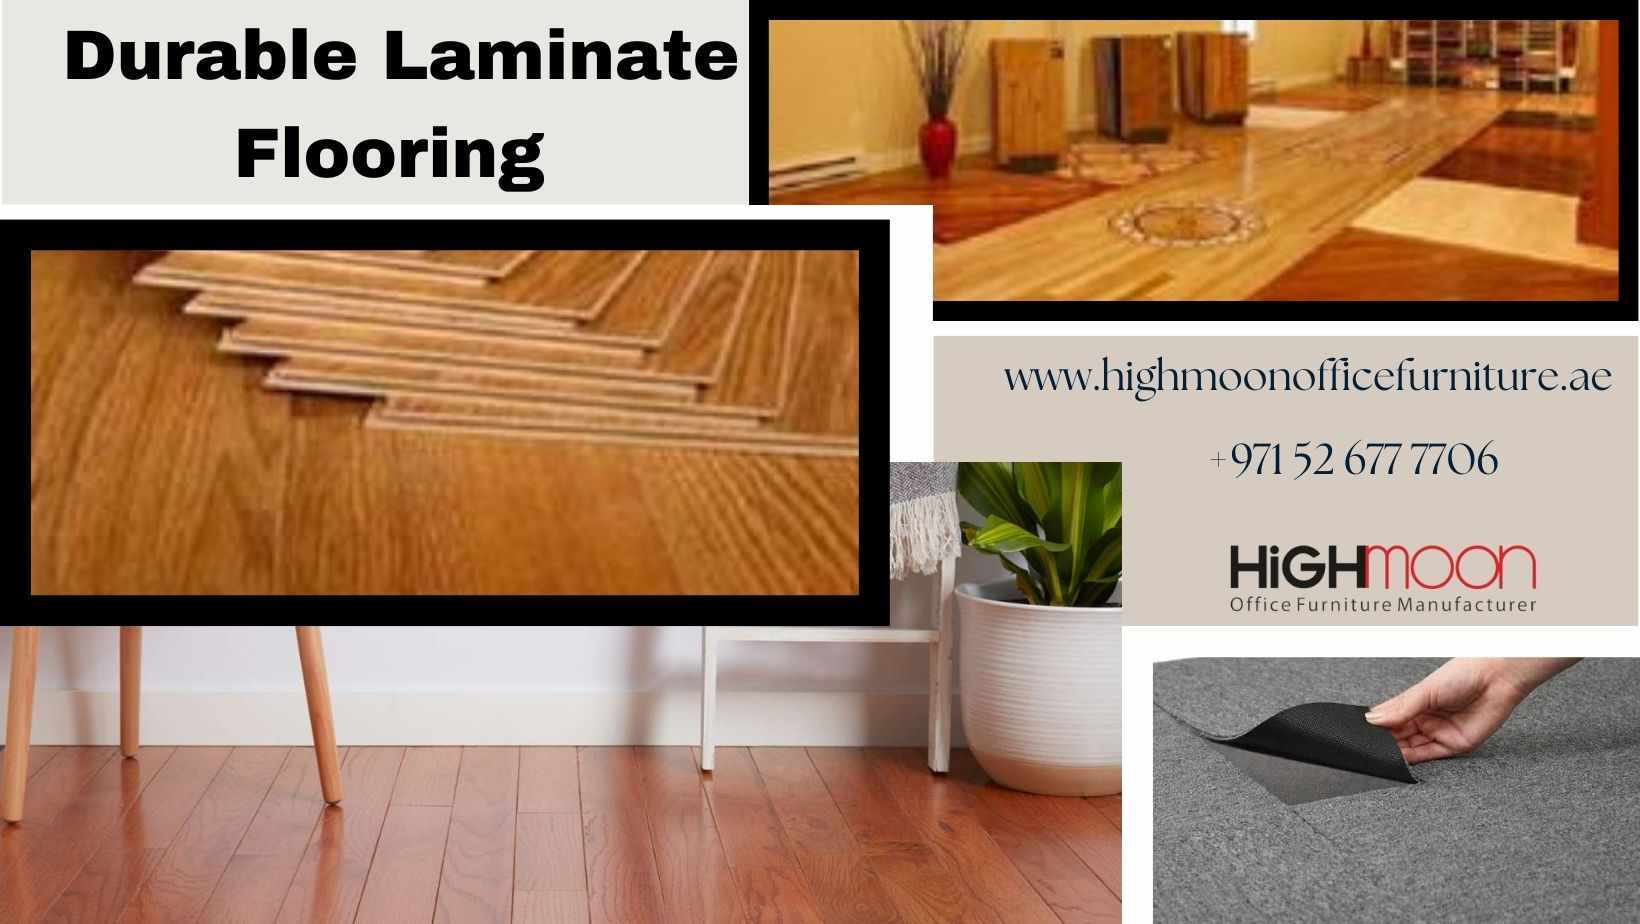 Check Out Highmoon’s Durable Laminate Flooring